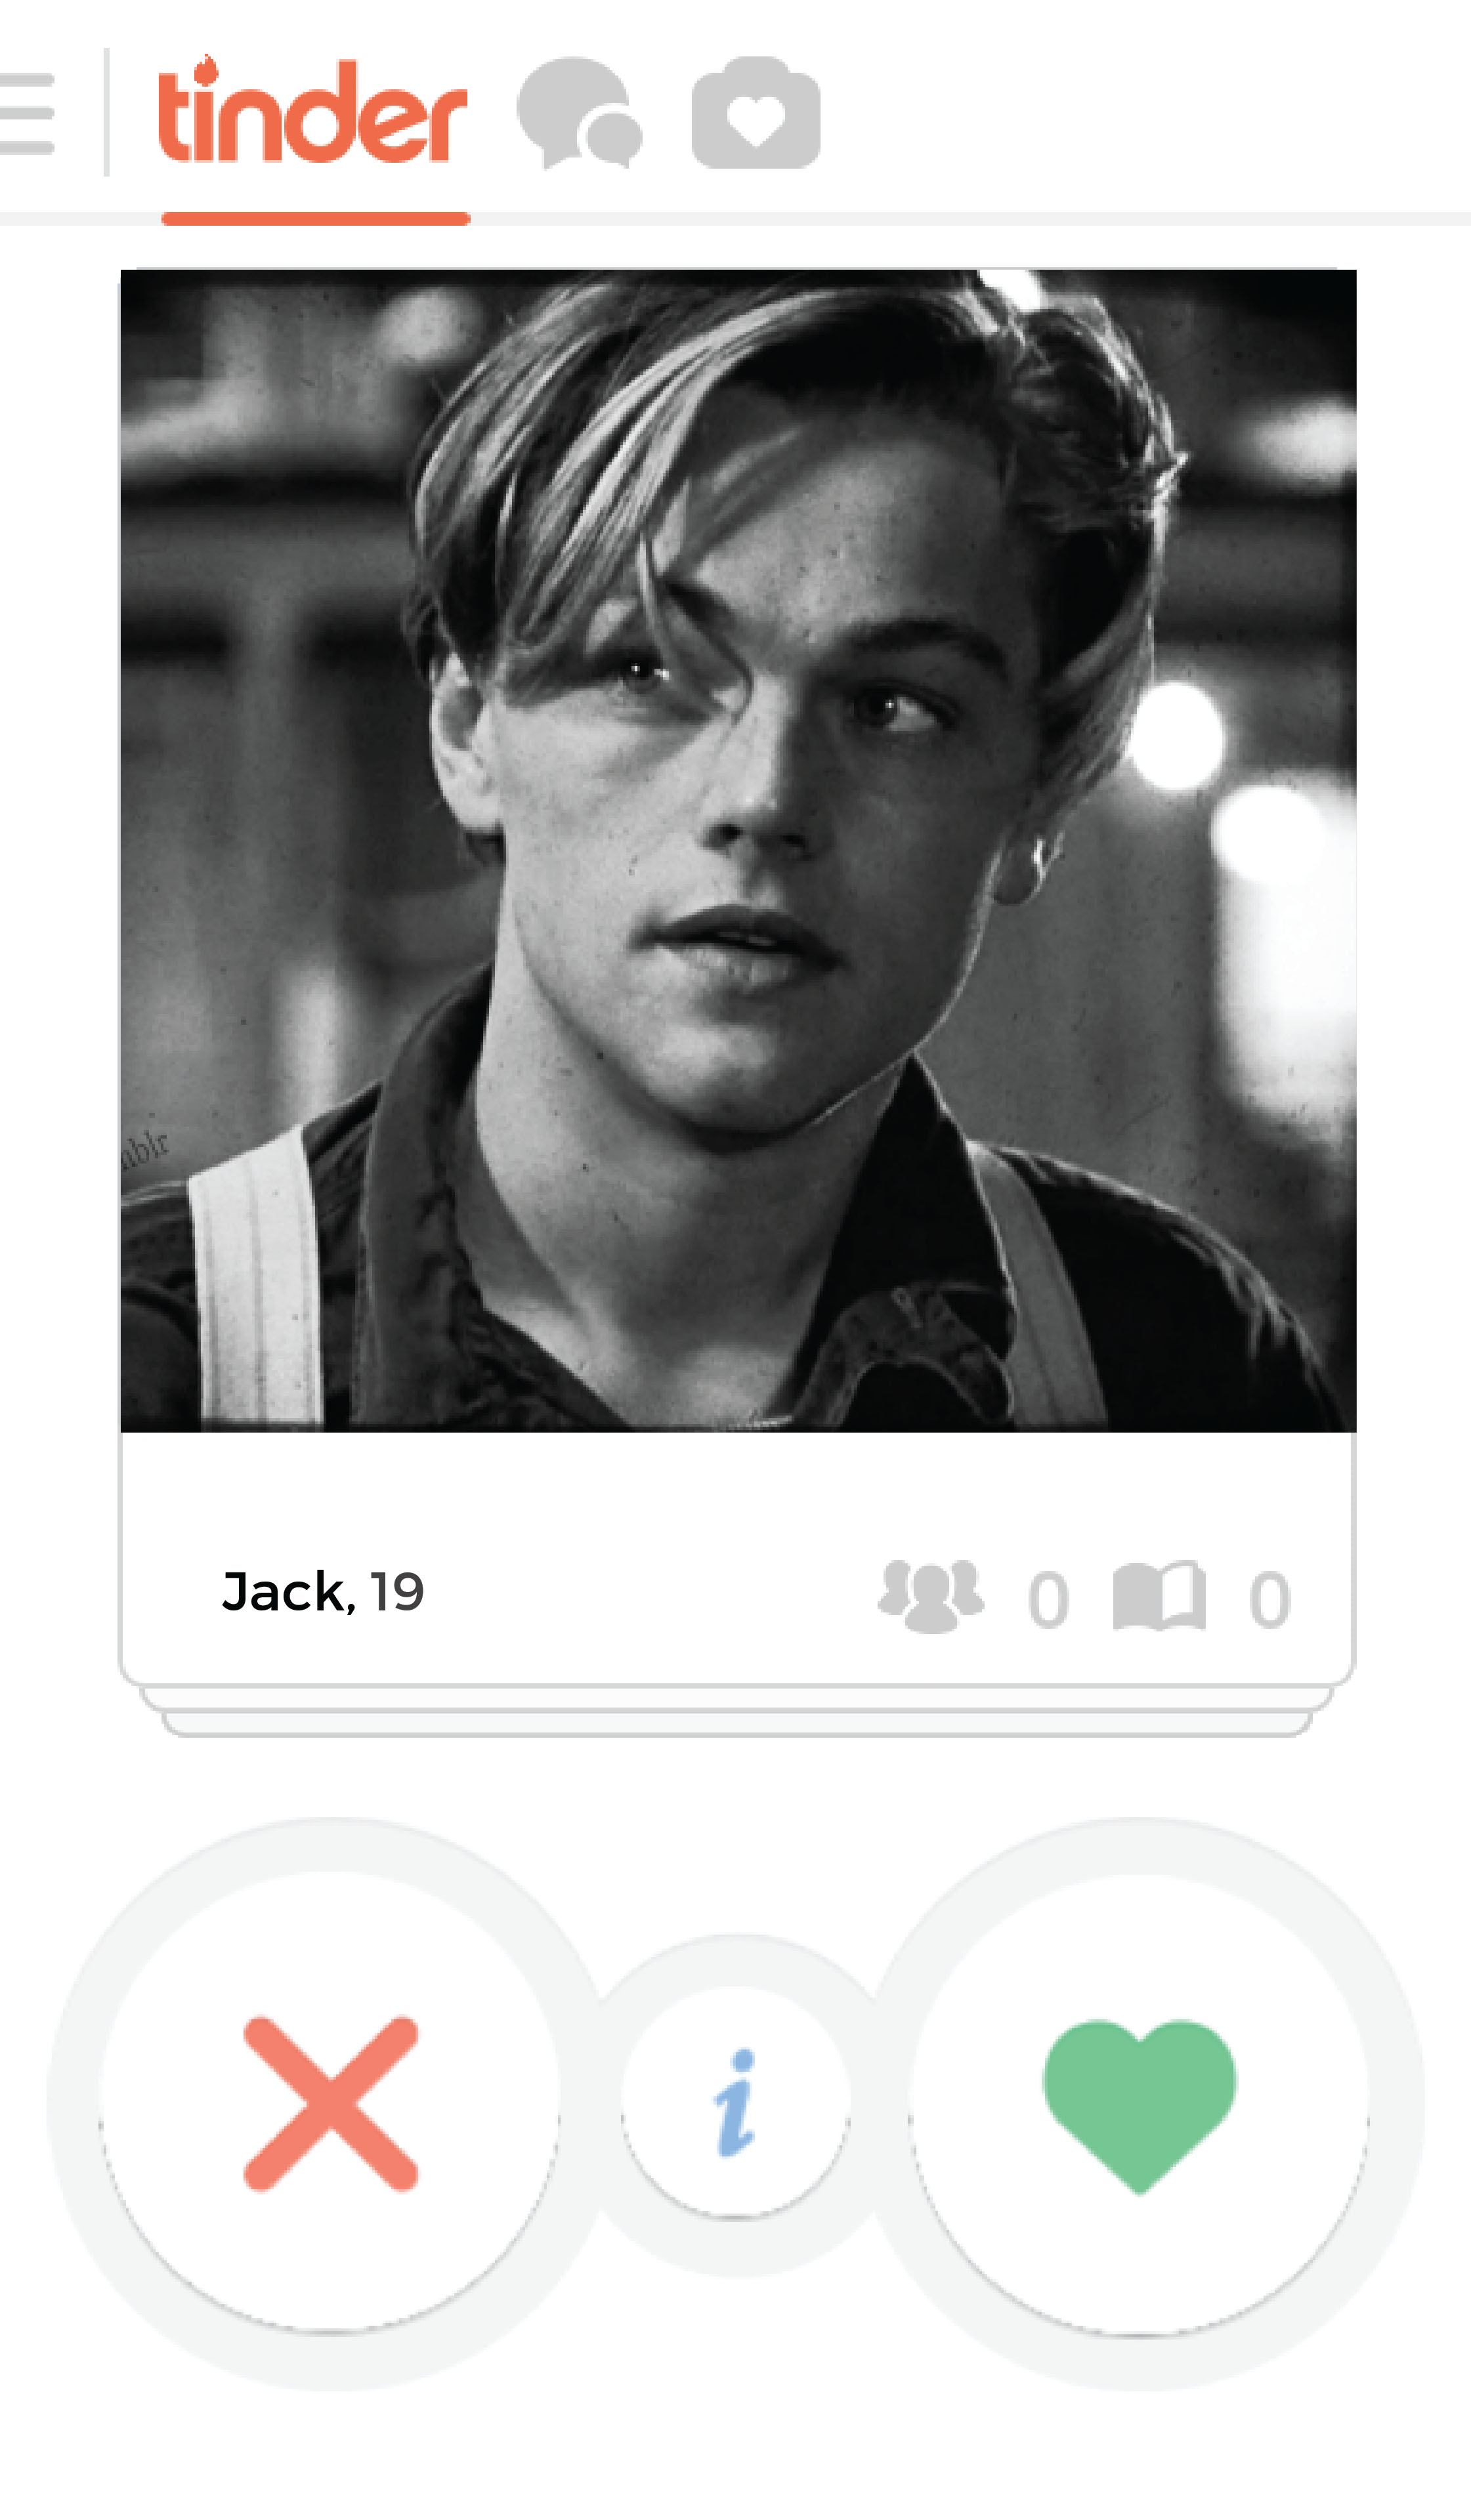 A Tinder profile for Jack, Leonardo DiCaprio's character in "Titanic"